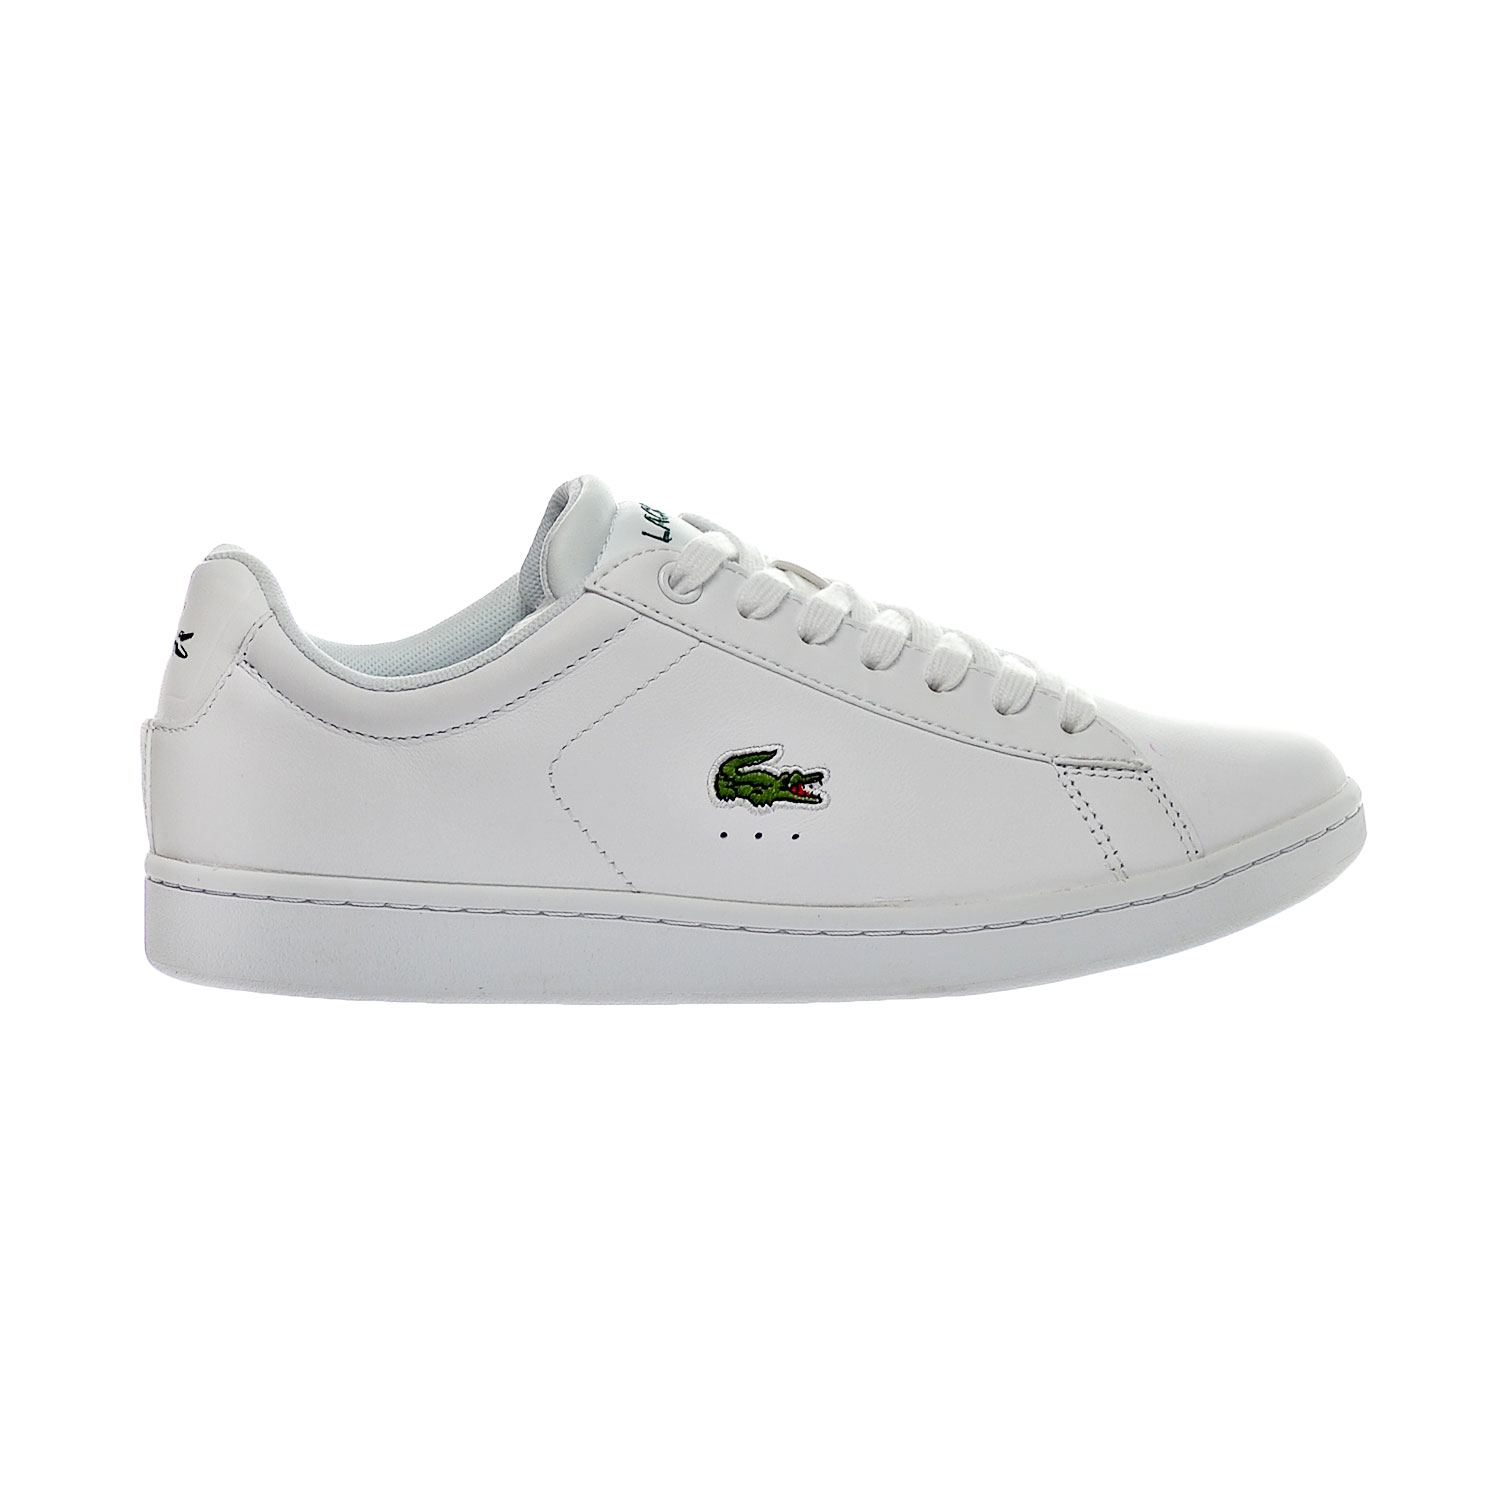 lcr shoes white